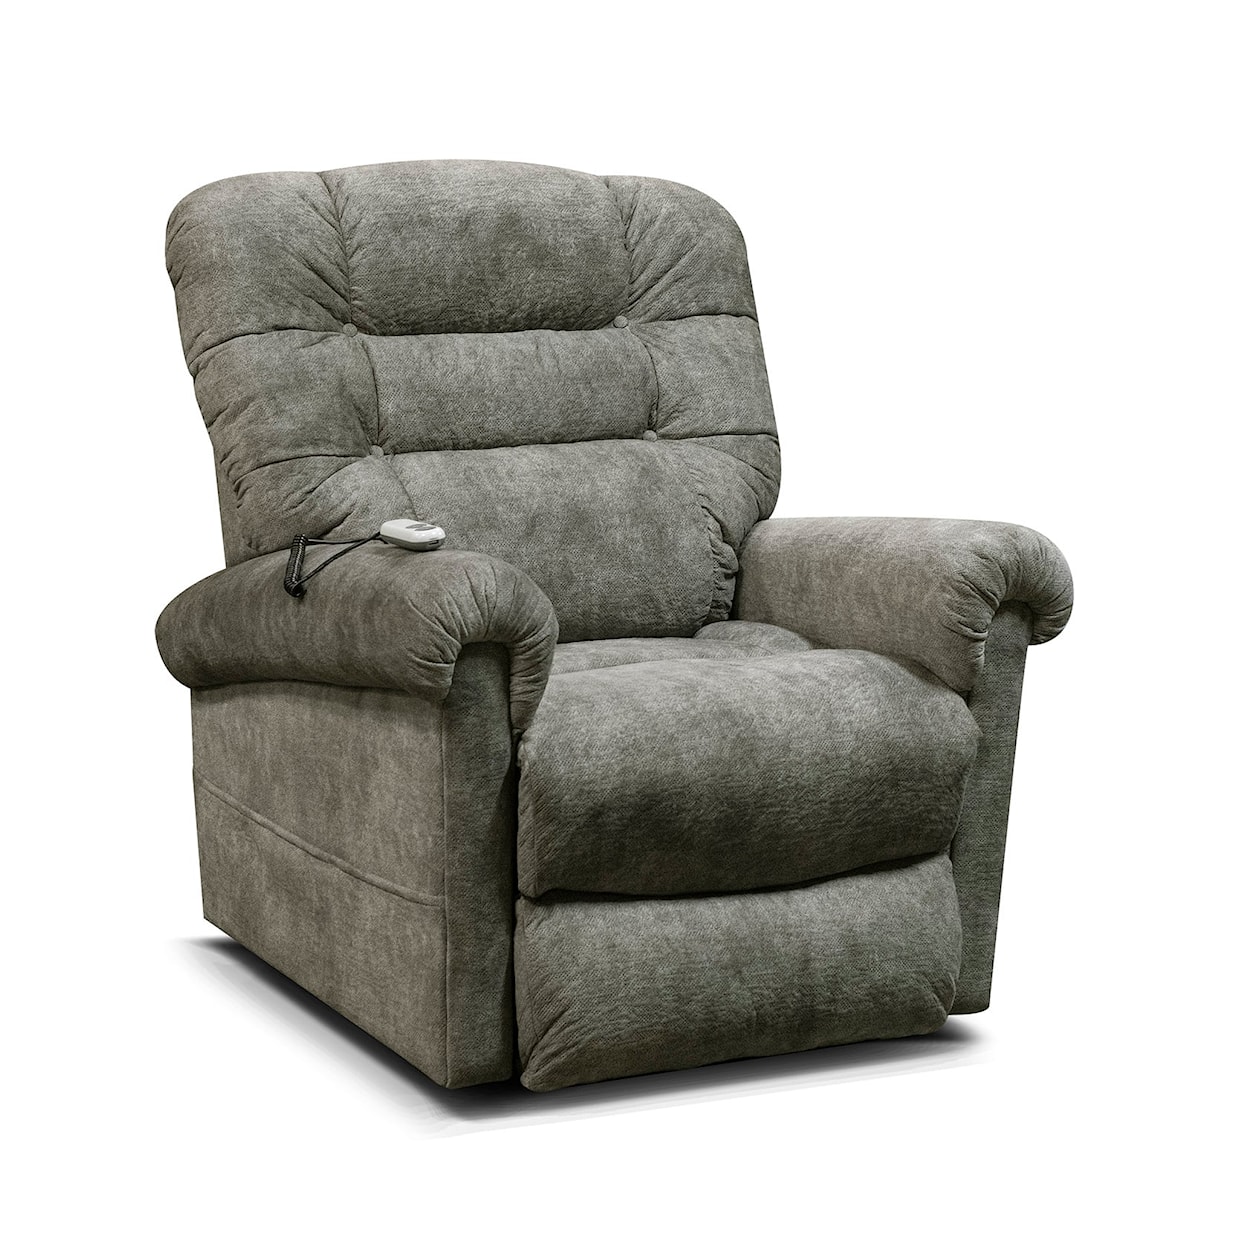 Tennessee Custom Upholstery EZ7A00 Series Reclining Lift Chair